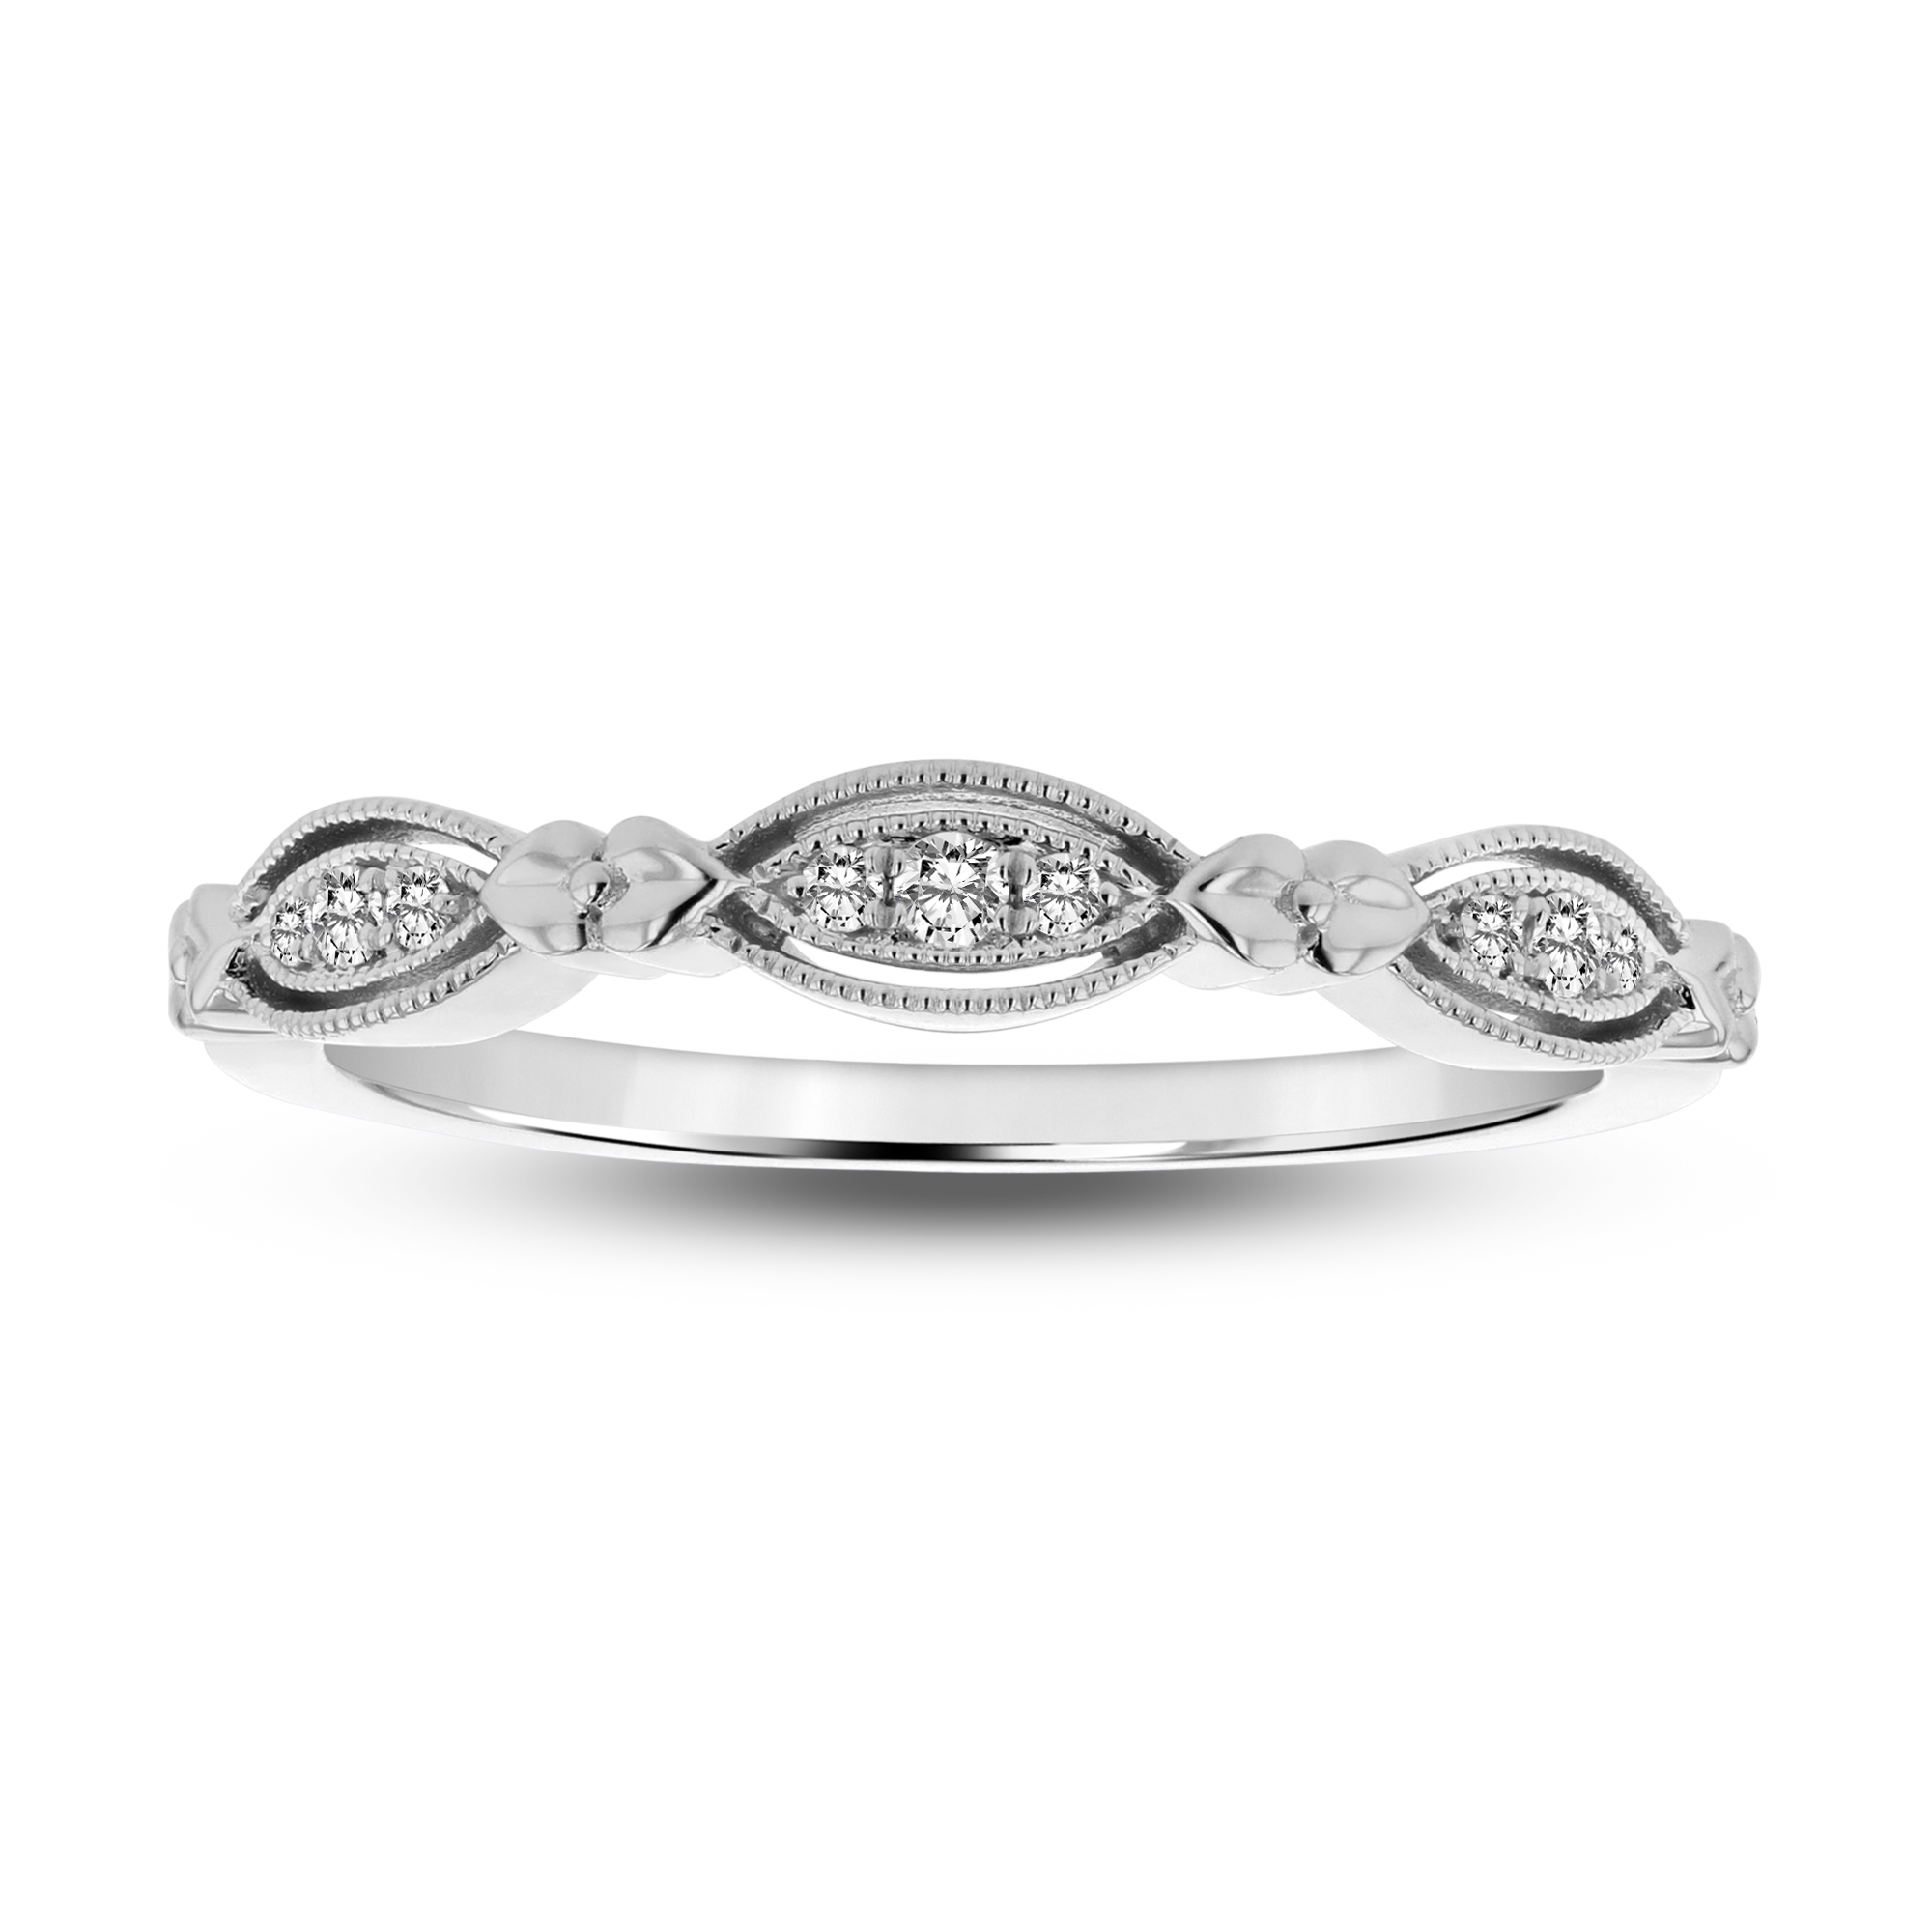 View 0.11ctw Diamond Band in 14k White Gold